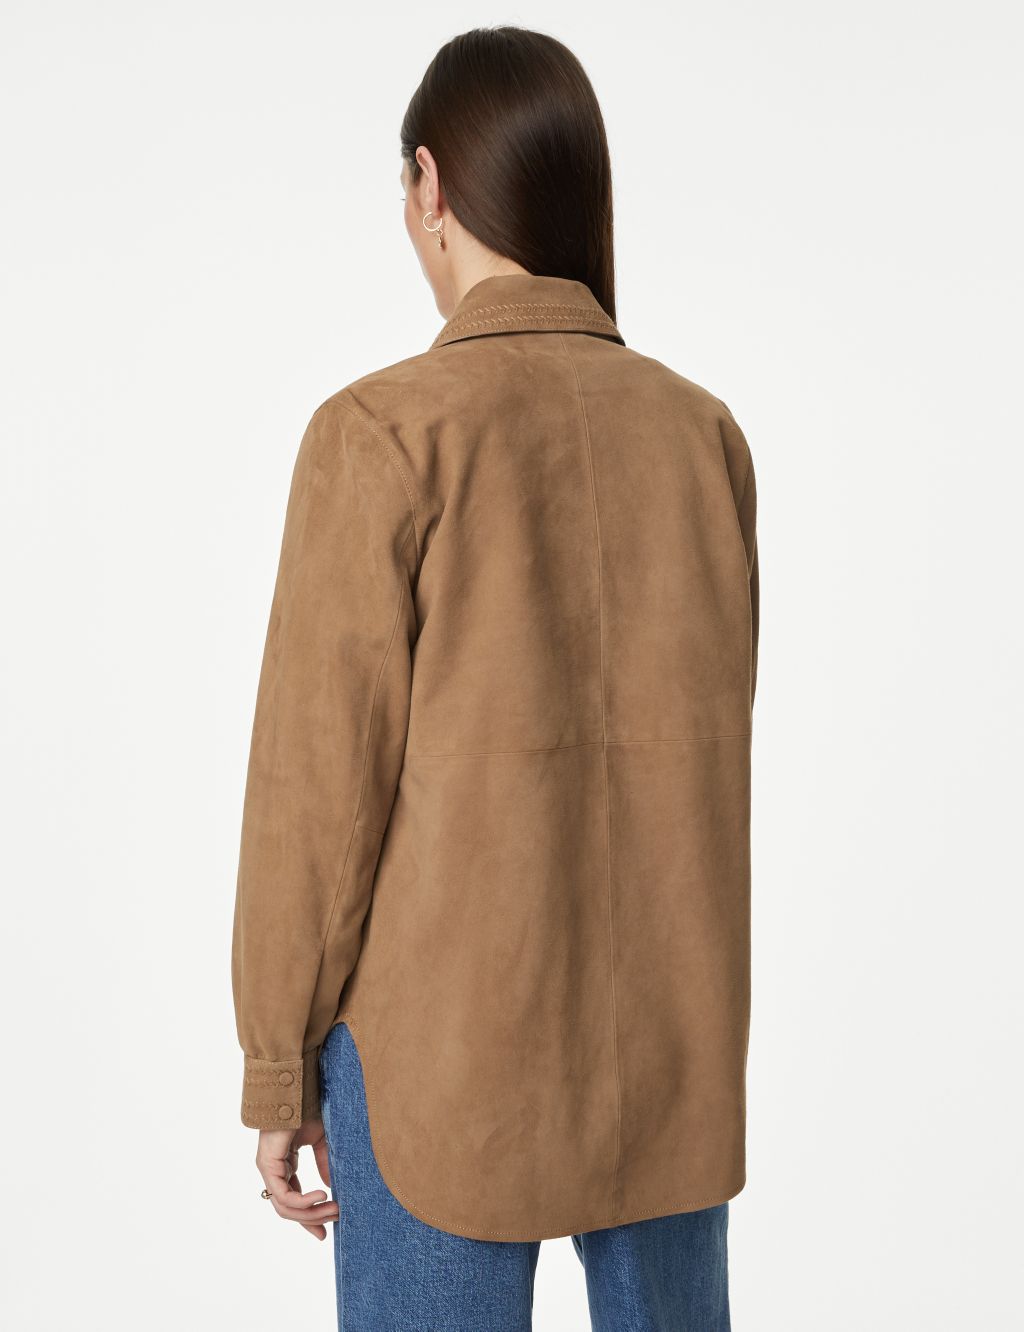 Suede Collared Overshirt image 3